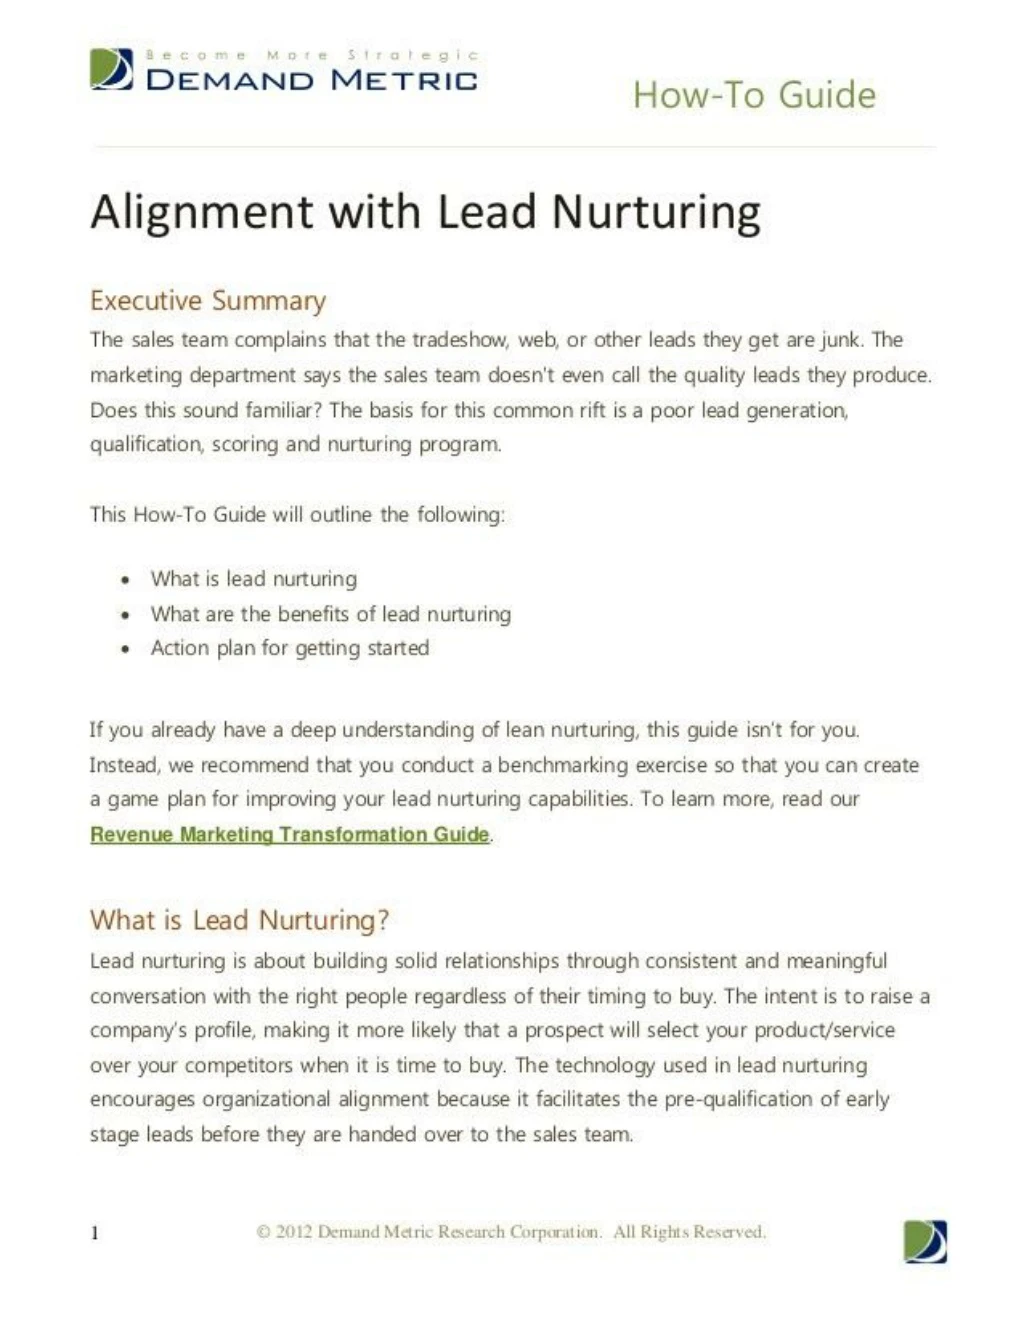 align sales and marketing with lead nurturing